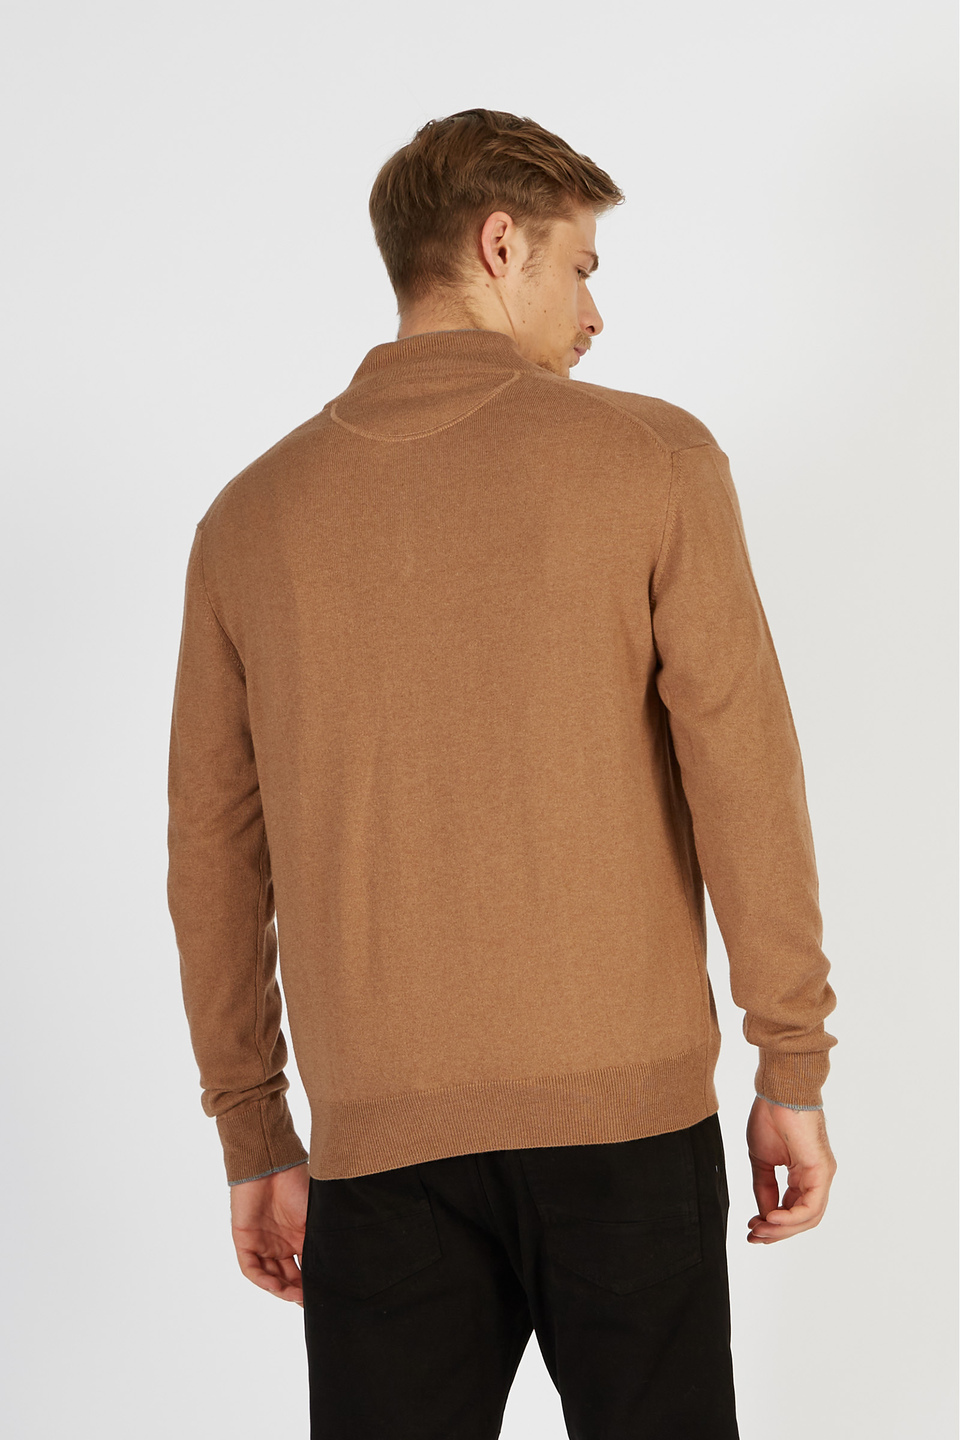 Men’s knitted sweater with long sleeves in cotton and regular fit wool blend with zip neckline | La Martina - Official Online Shop